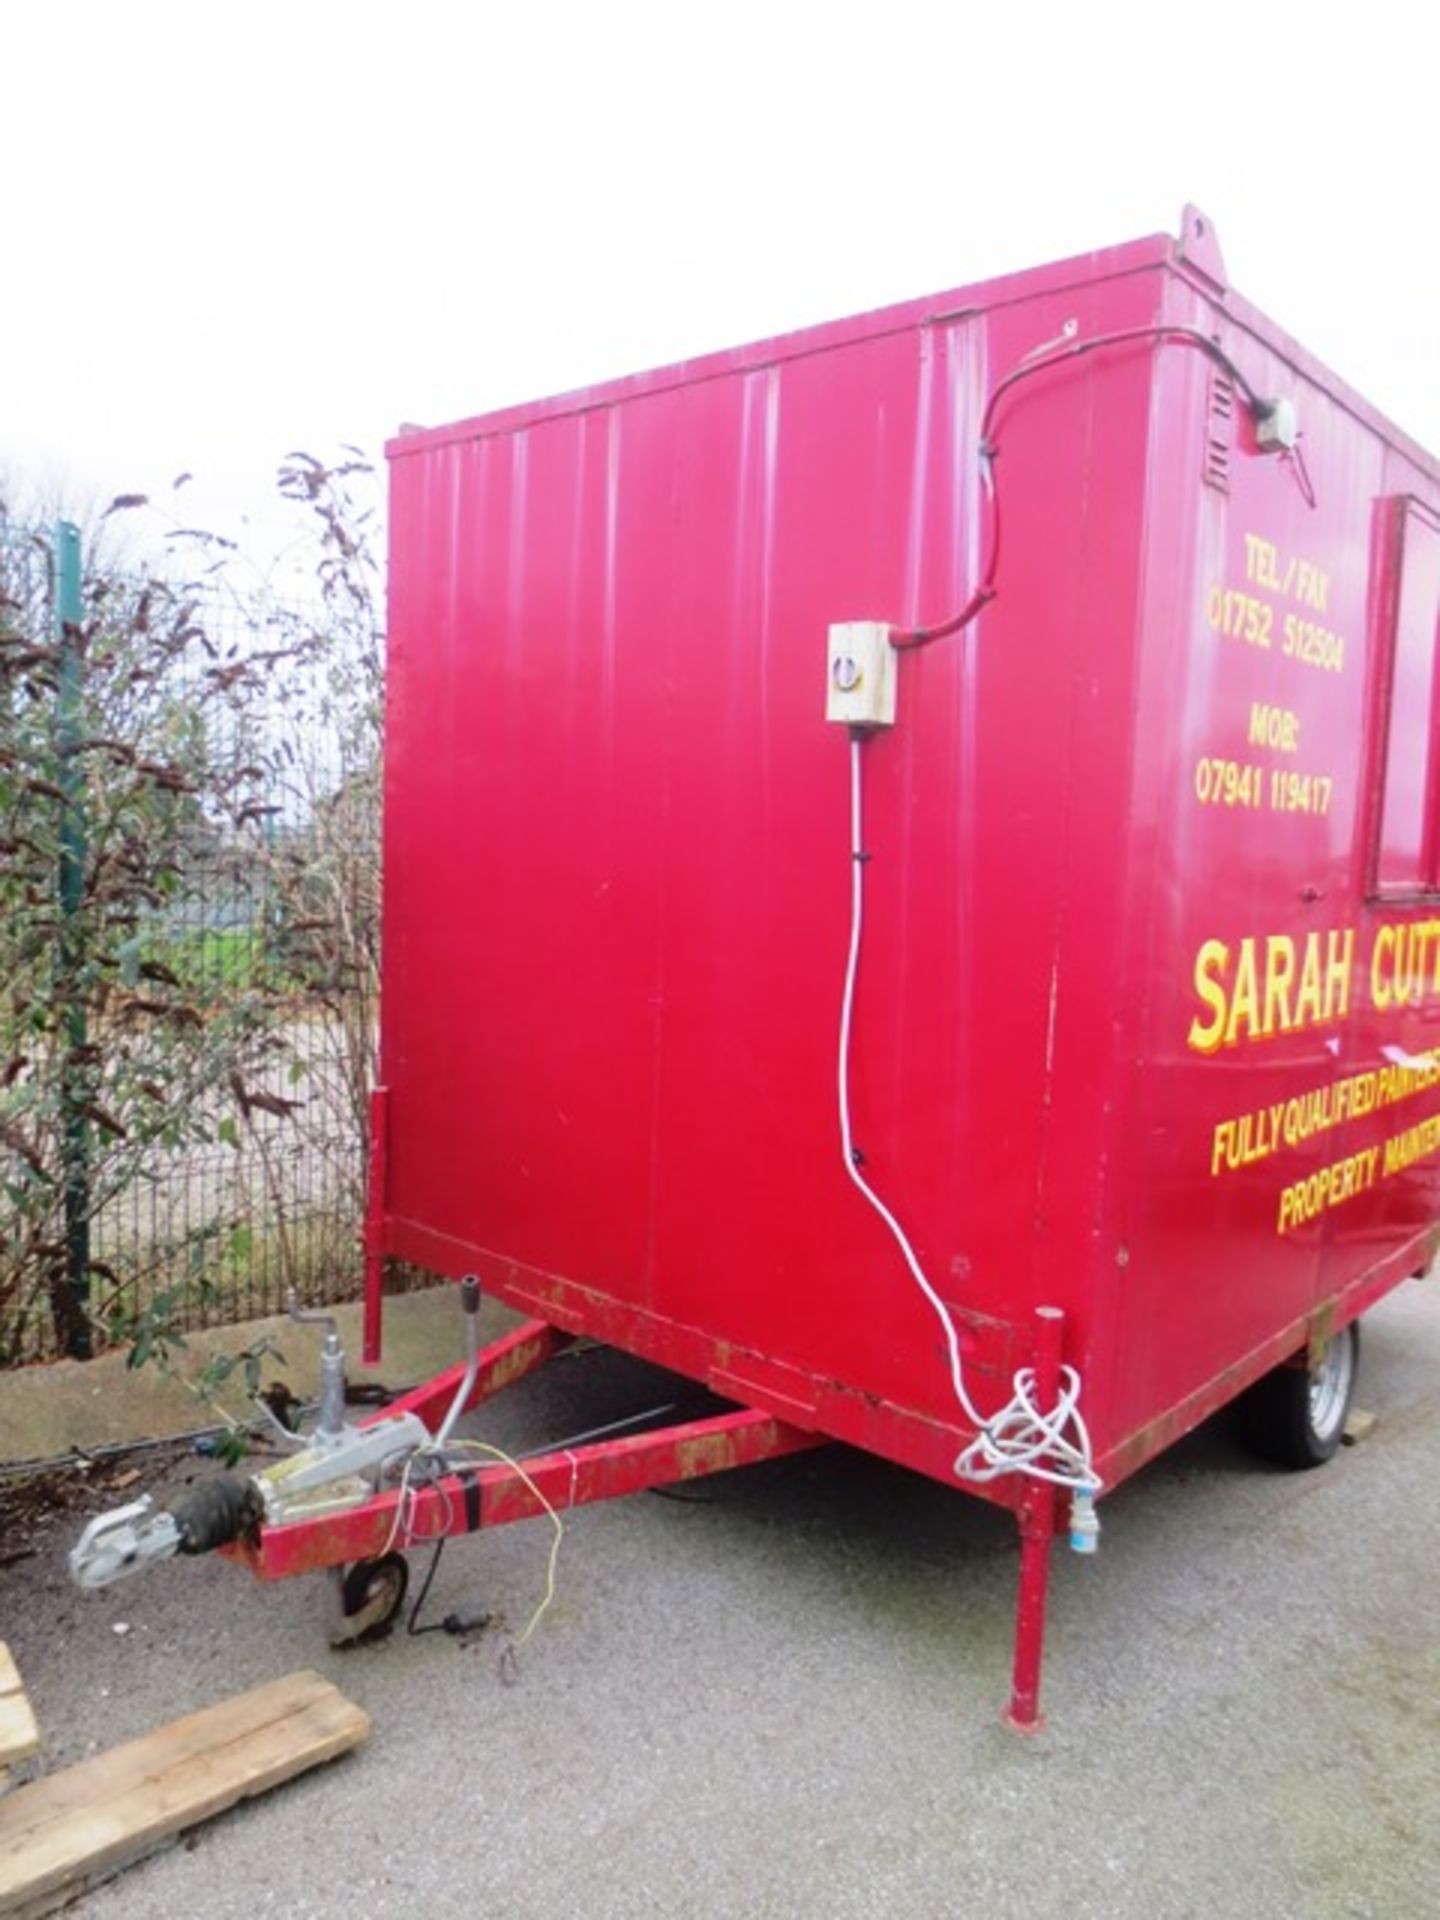 Single axle, steel framed mobile site cabin, approx 3m x 2m, with 240v power supply, serial no: - Image 2 of 3